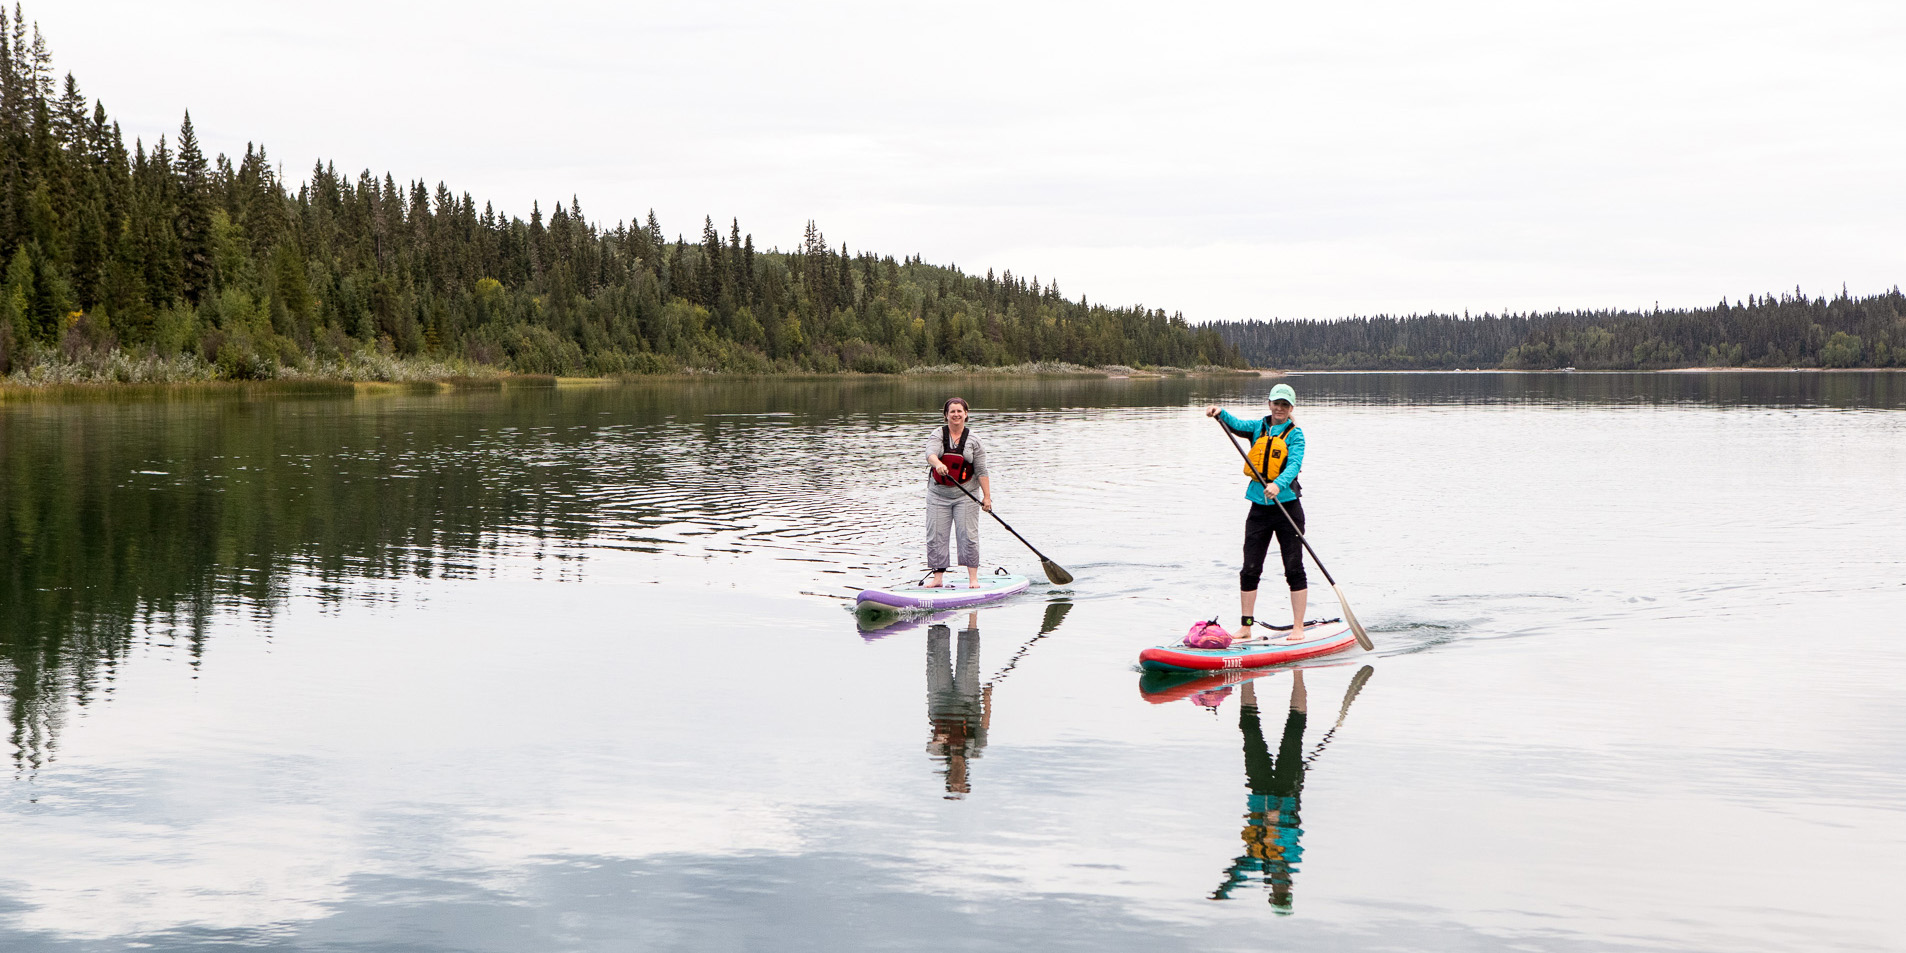 Two women wearing life jackets paddle Pine Lake on stand-up paddleboards. The water is calm and evergreen trees line the shore in the background. 